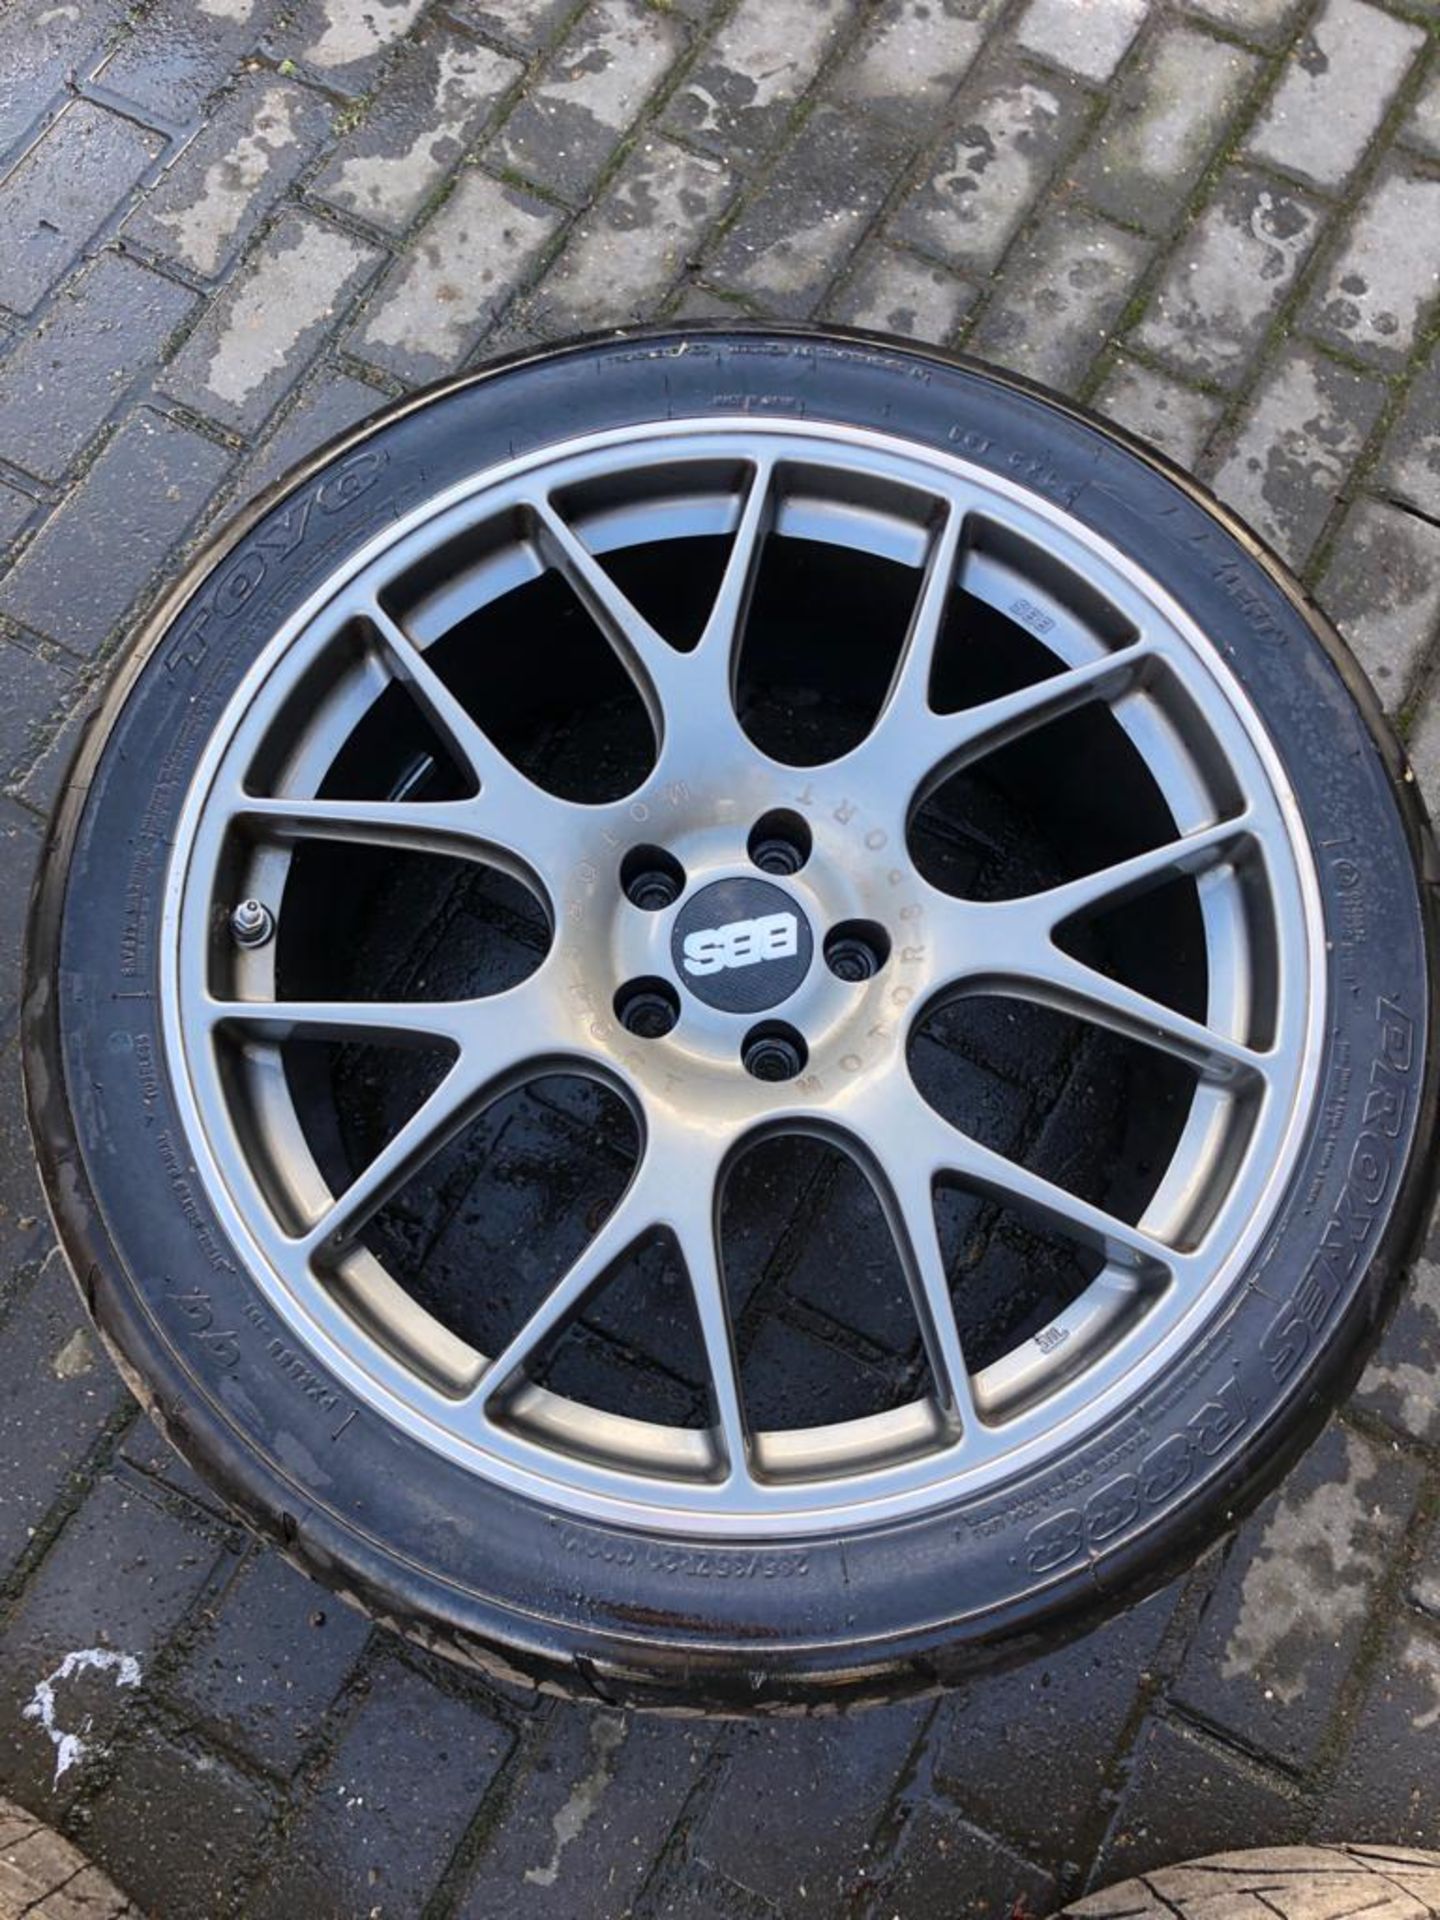 GENUINE BBS CH-R 20" SATIN ANTHRACITE NÜRBURGRING ALLOY WHEELS SET OF 4, TOYO R888 TYRES £3400 NEW - Image 3 of 17